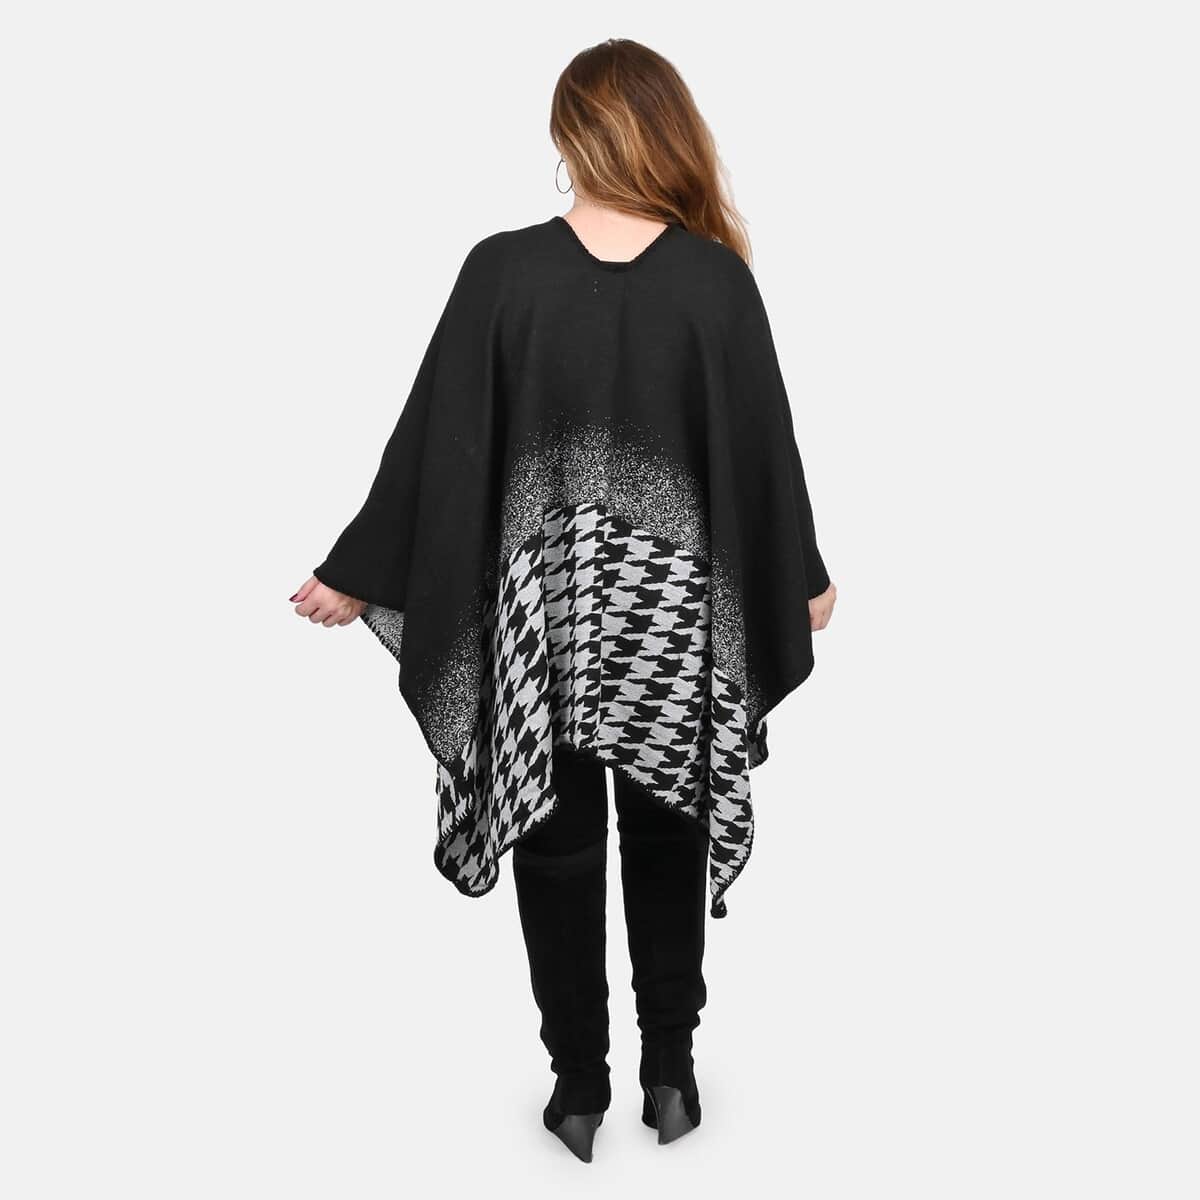 Tamsy Black Houndstooth Reversible Kimono - One Size Fits Most image number 1